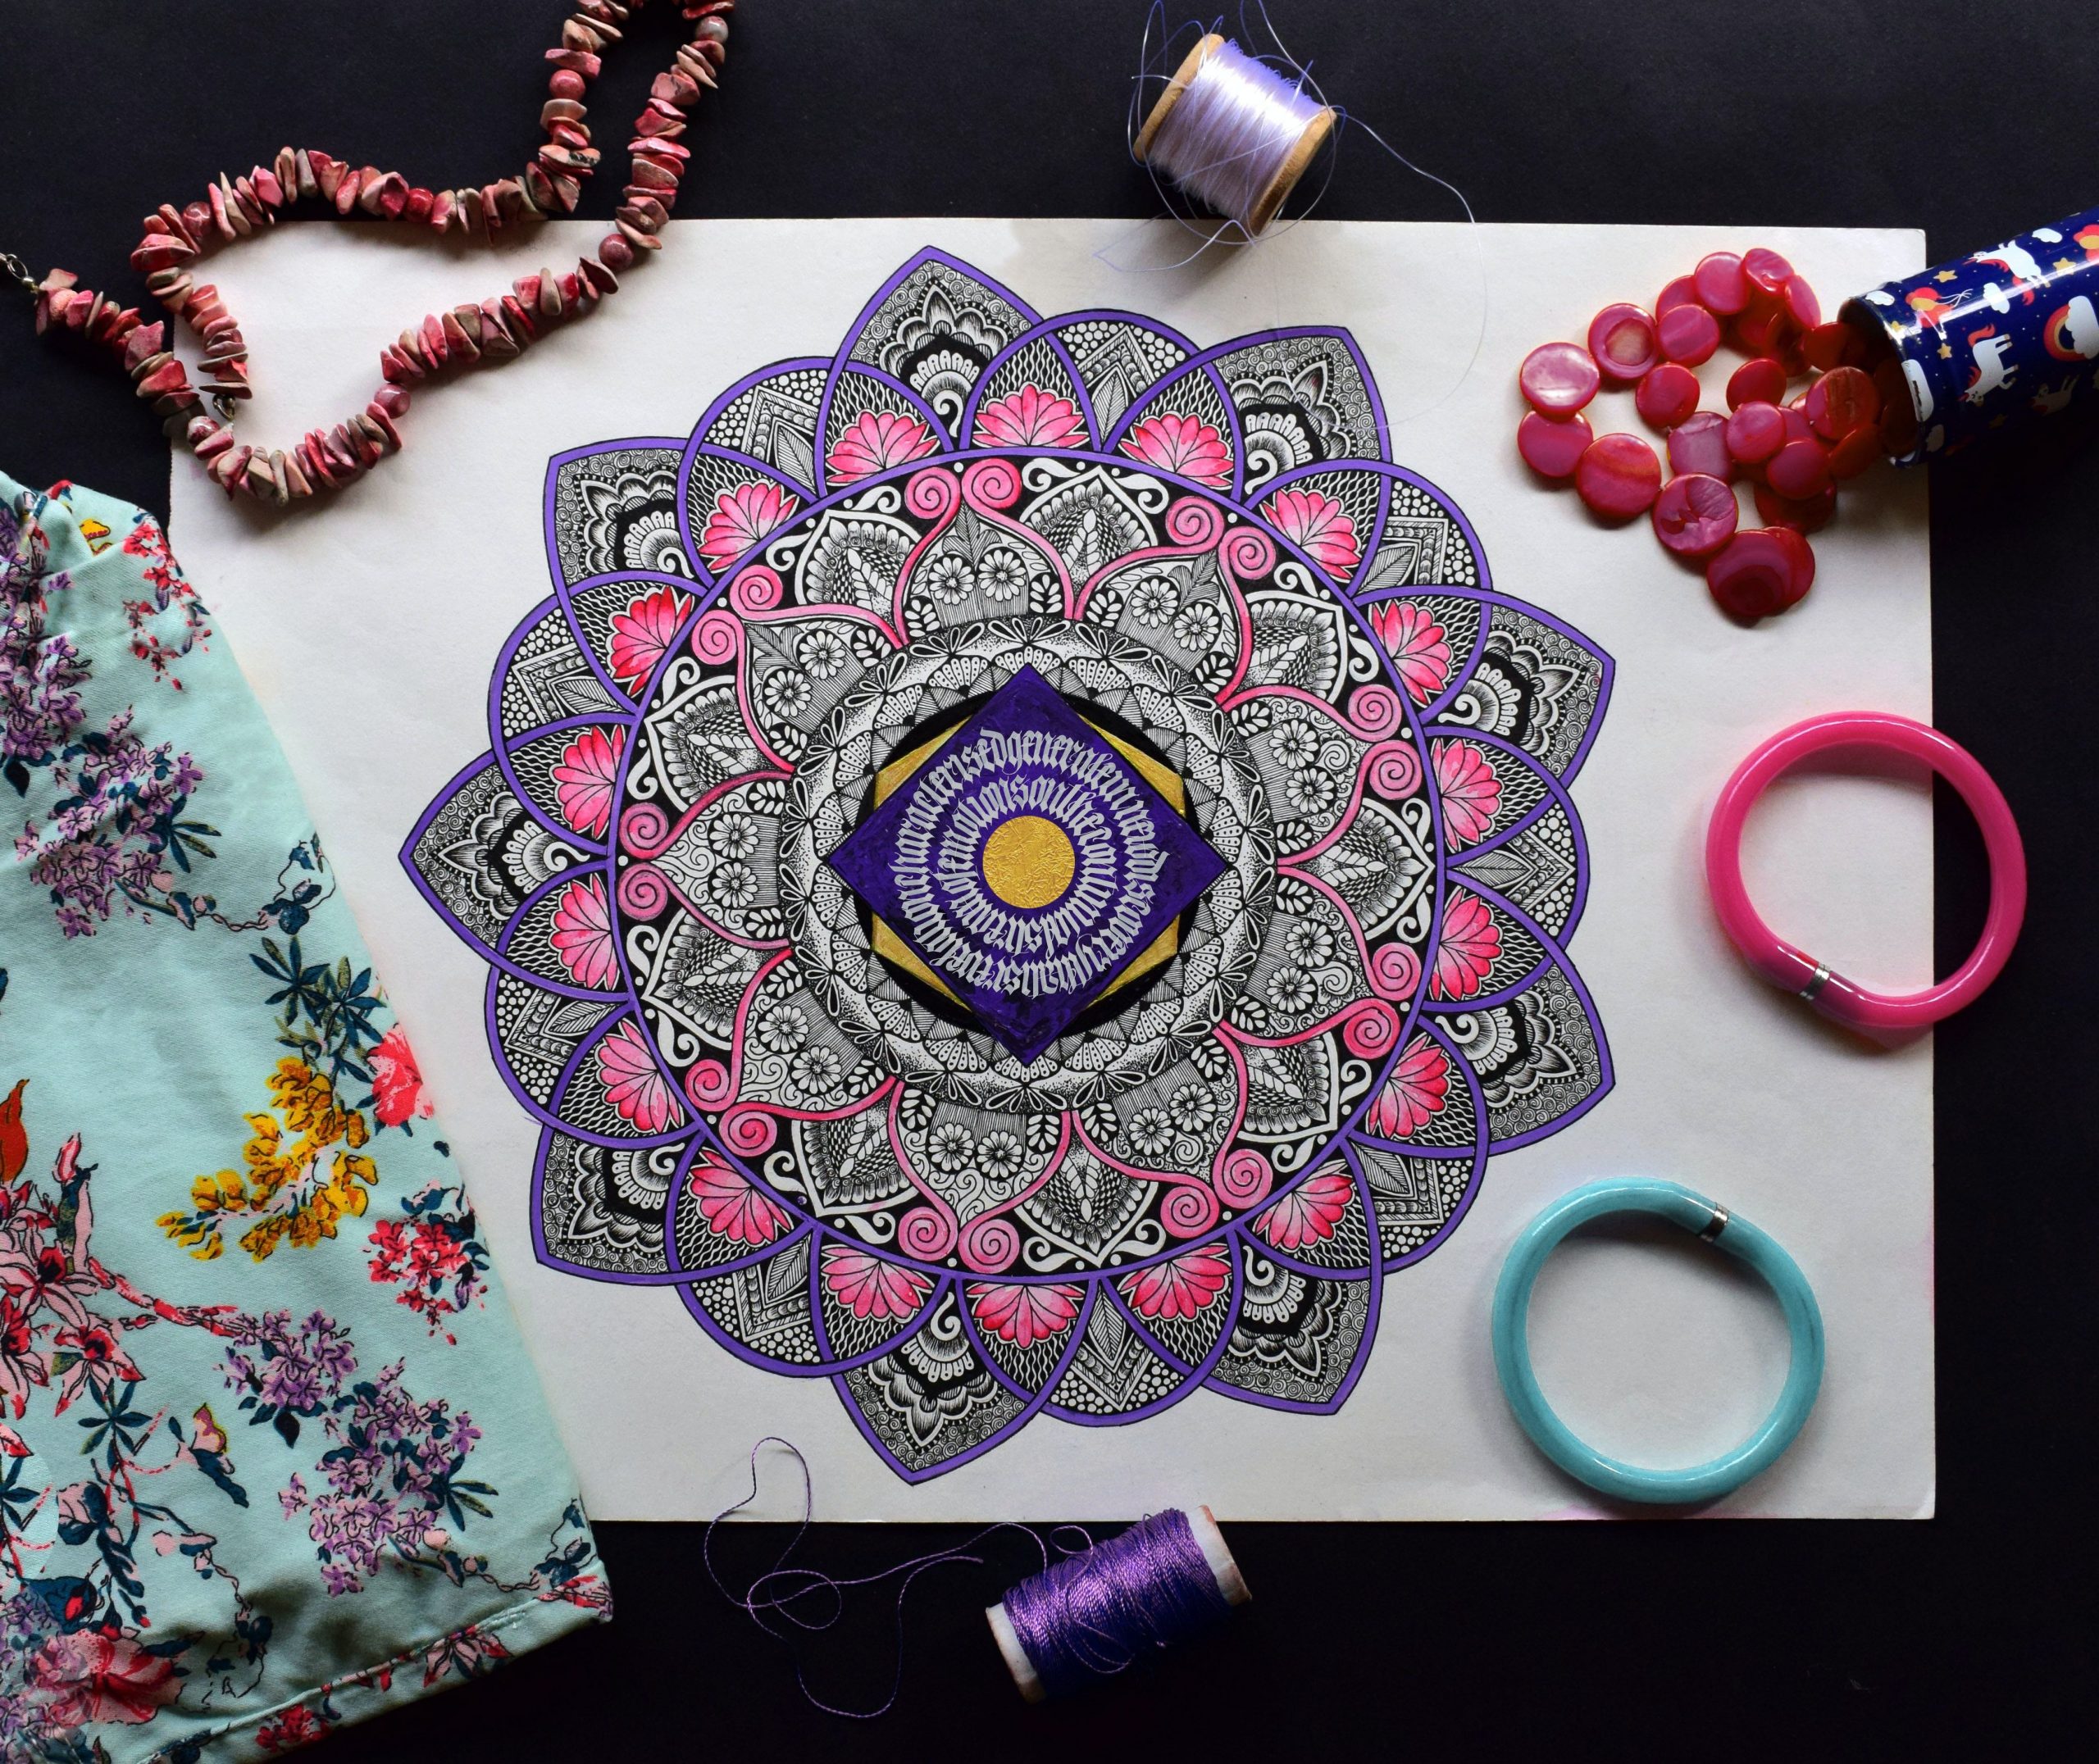 What are mandalas, and their different types